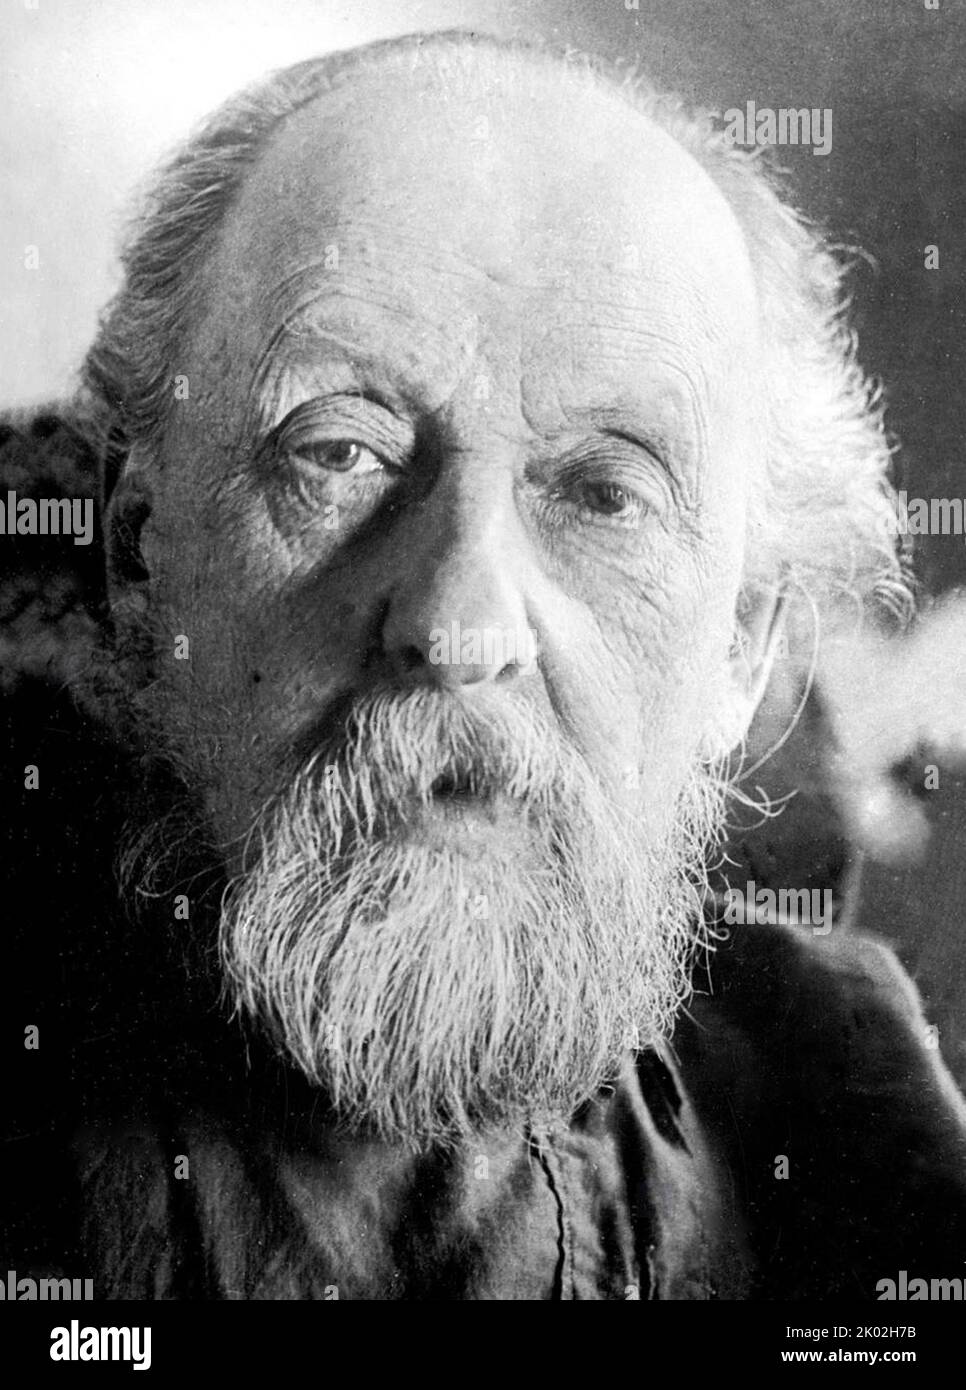 Cosmonautics founder K. E. Tsiolkovsky (1857 - 1935) was a Russian and Soviet rocket scientist and pioneer of the astronautic theory. Stock Photo